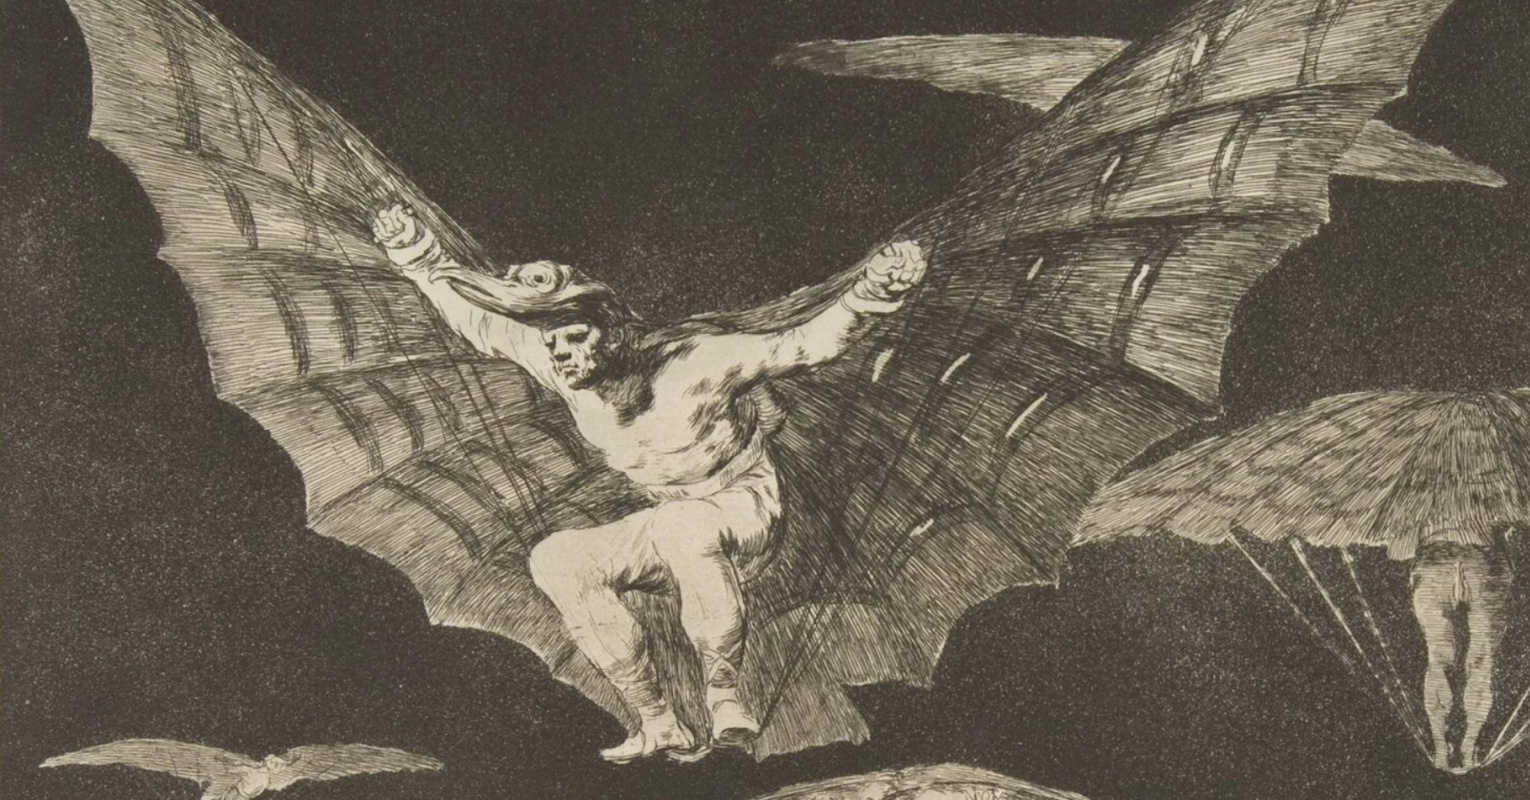 Not Only The Sleep of Reason: Graphics by Francisco Goya